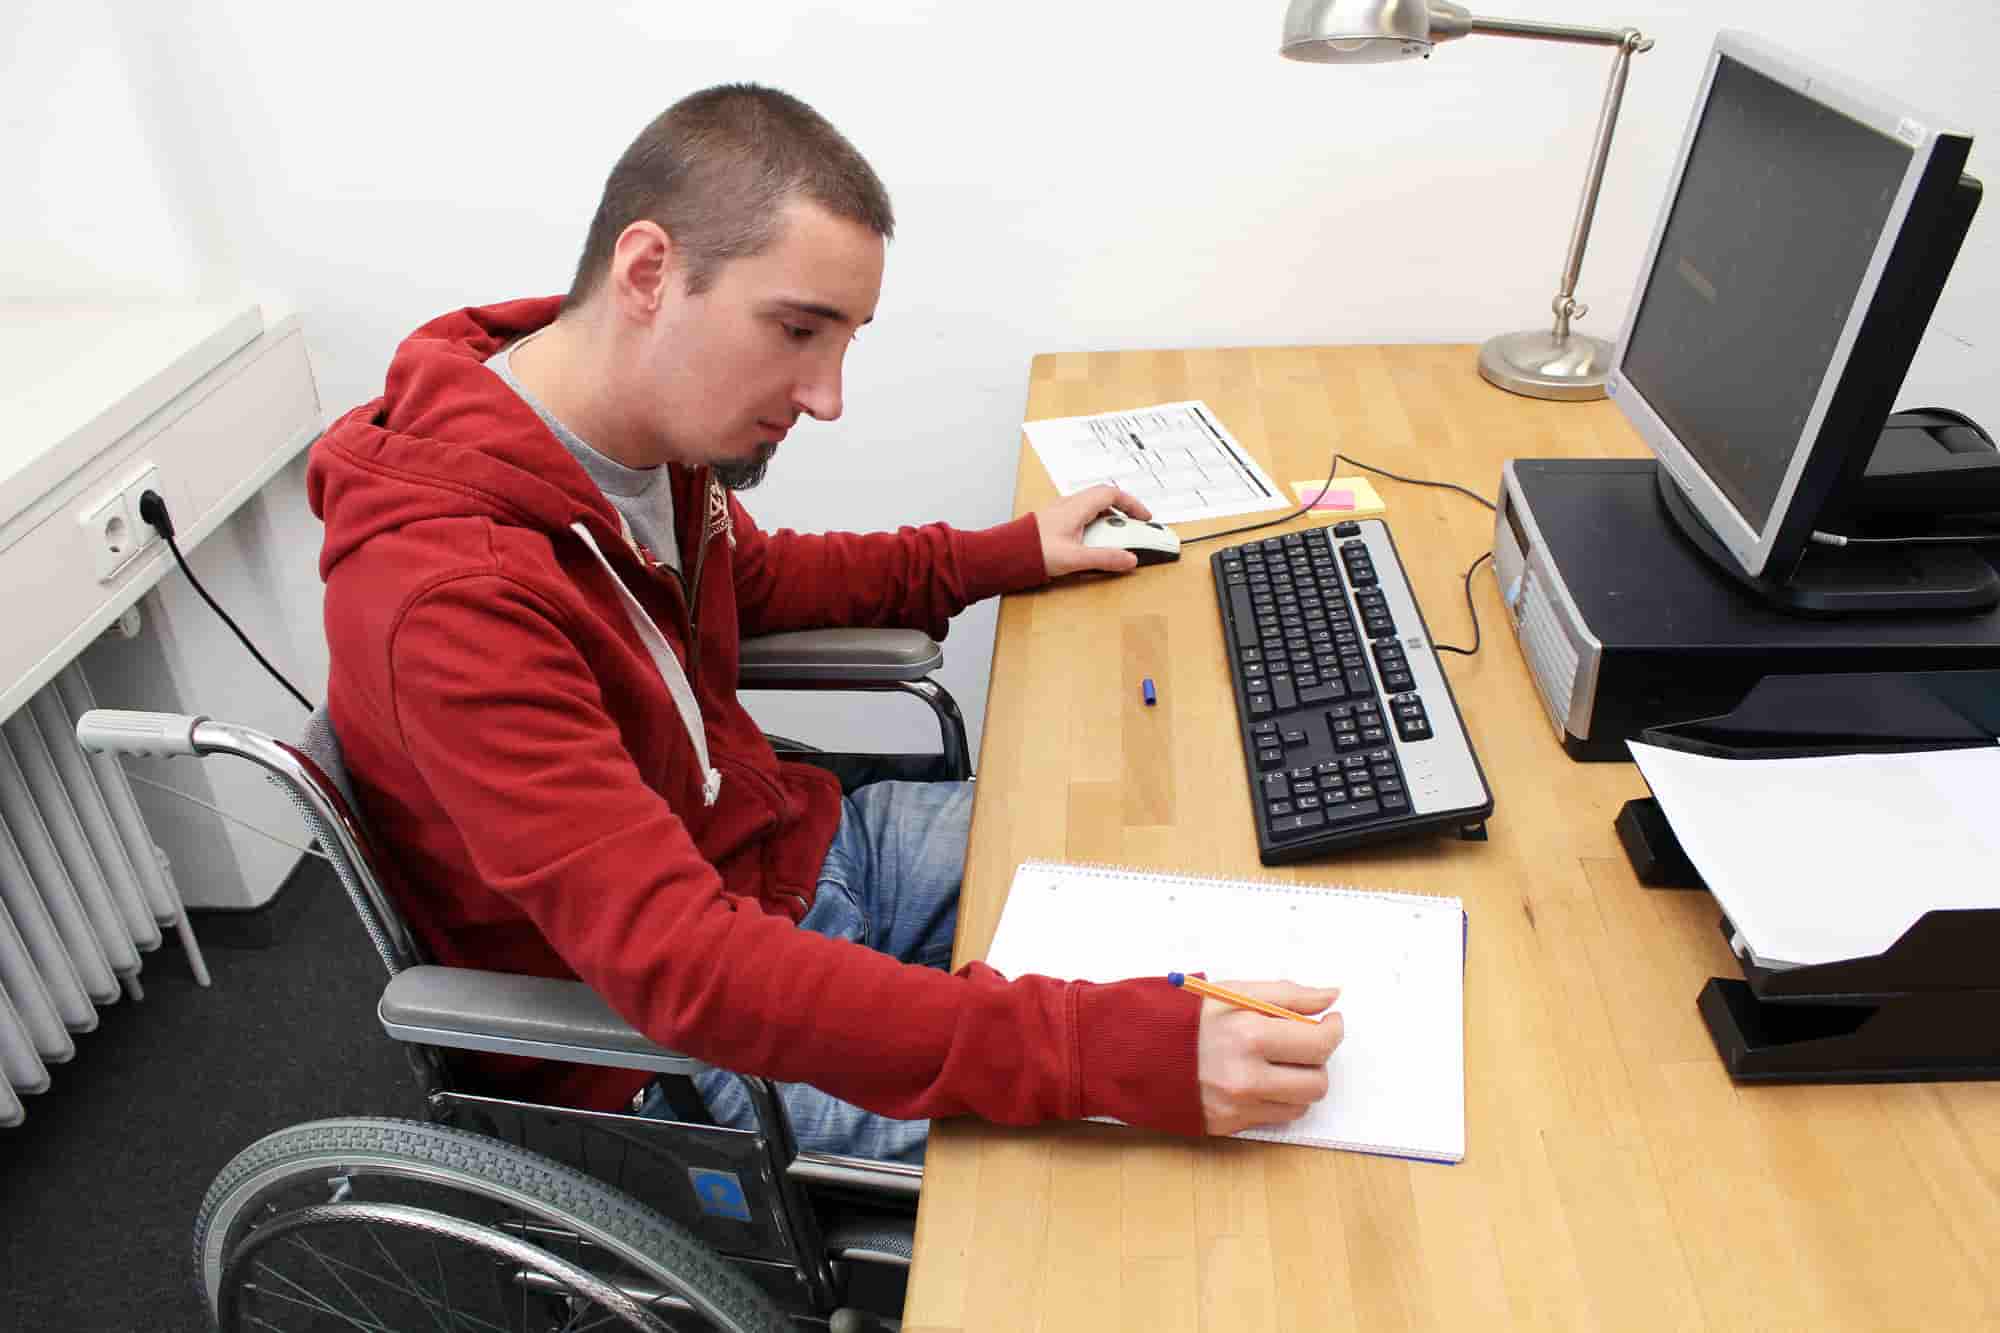 How To Find The Right Disability Services Jobs For You